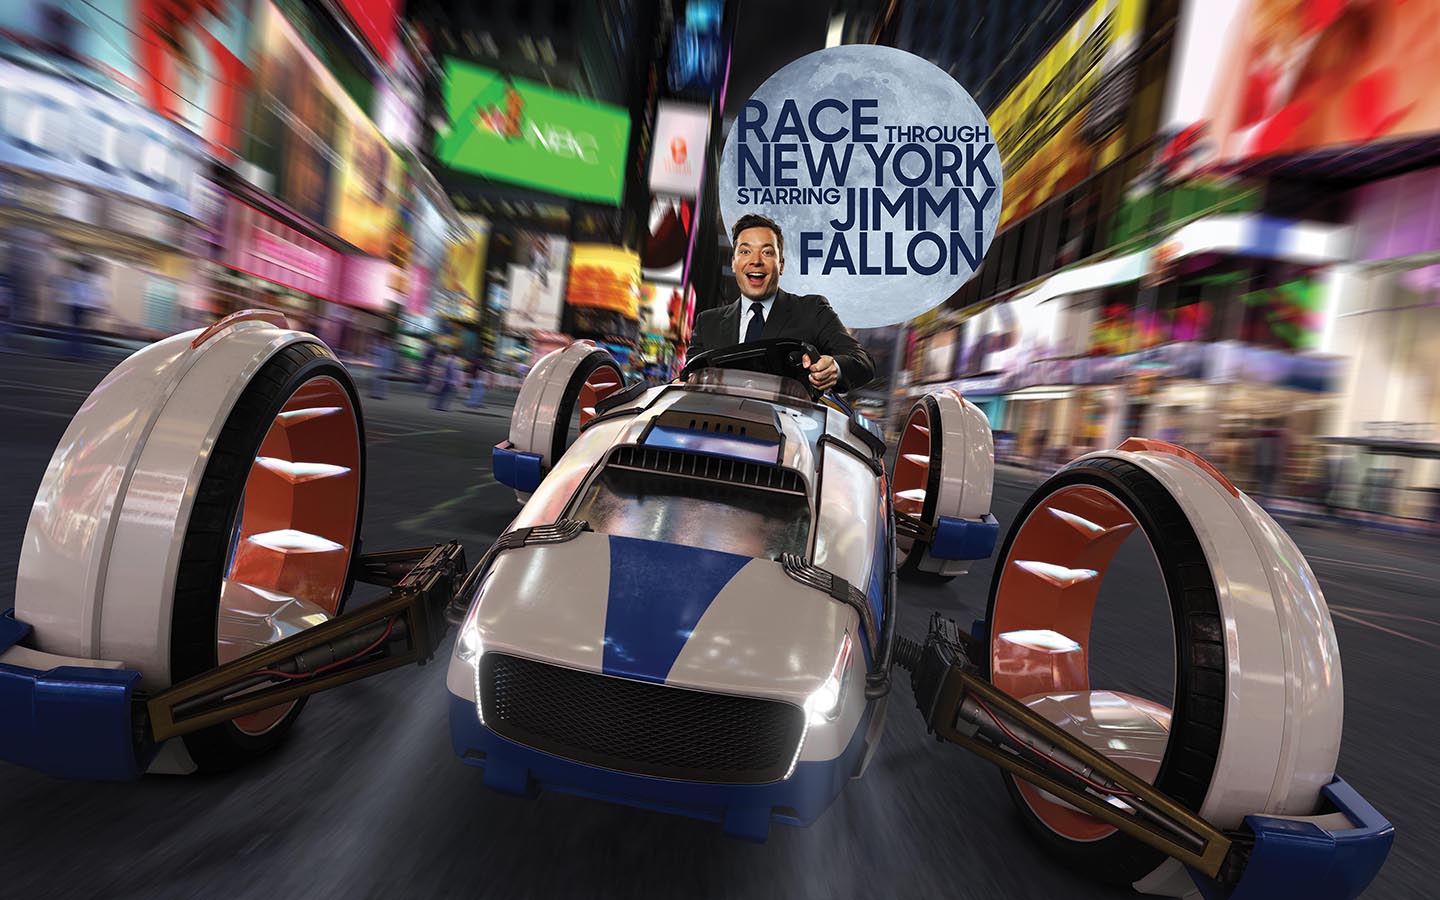 Step into 30 Rock and then it's off to the races with Jimmy Fallon.